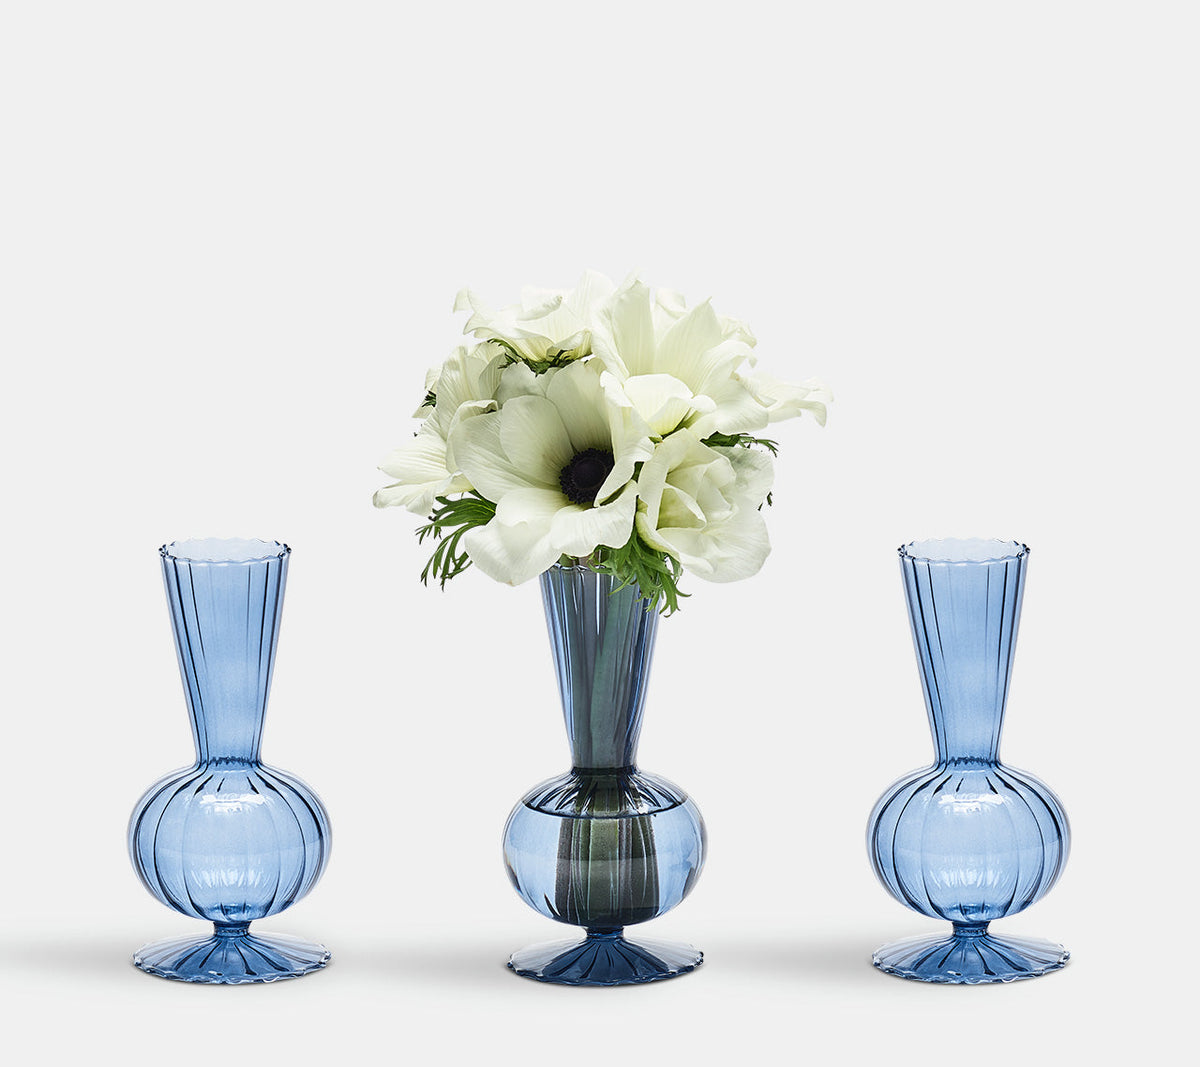 A glass Tess Bud Vase with white flowers in between two other Tess Bud Vases